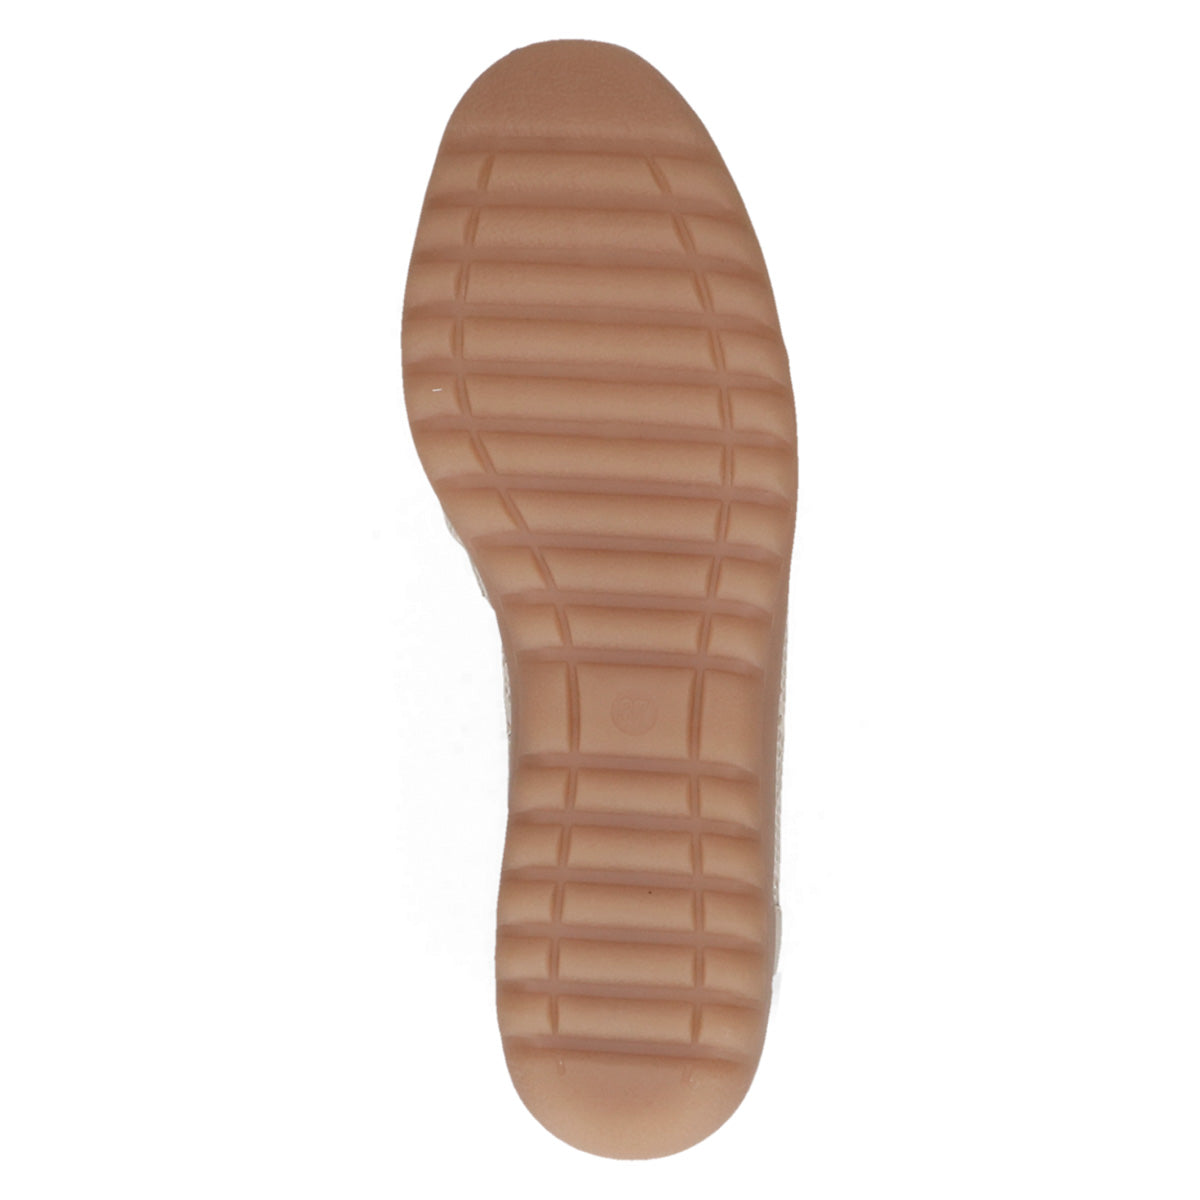 Durable sole of Caprice Light Gold shoe highlighted.